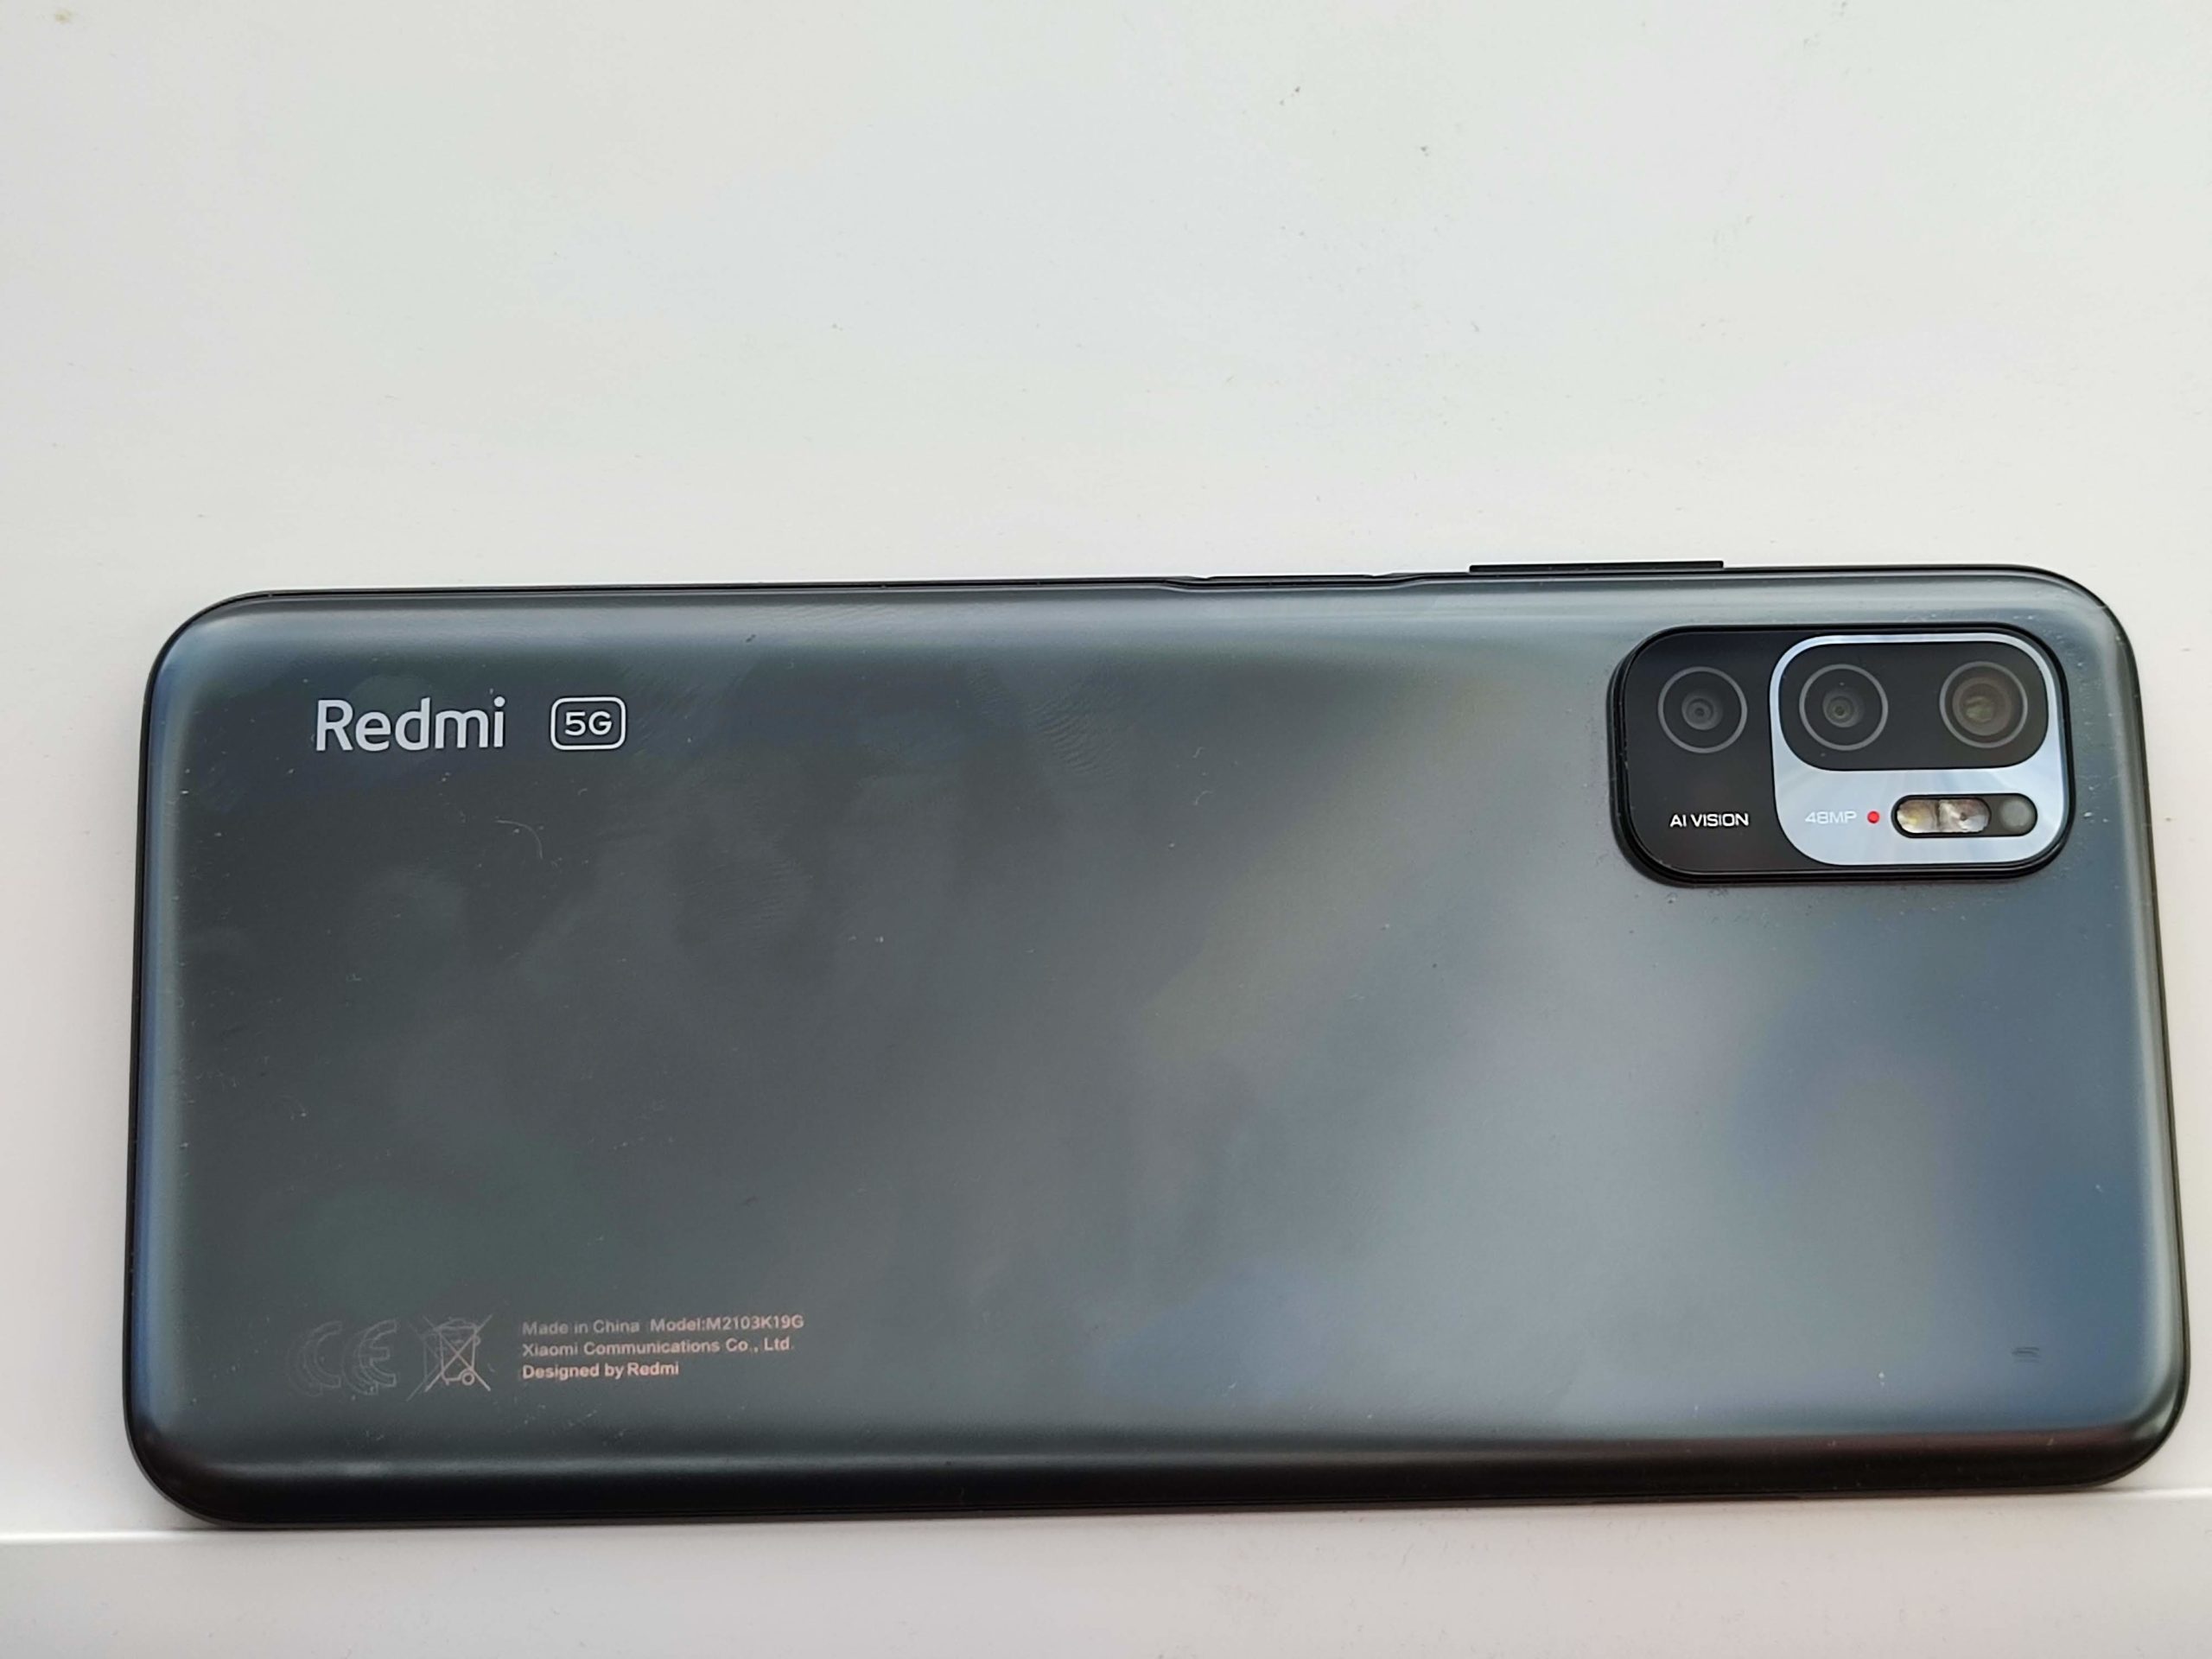 Redmi Note 10 5G review